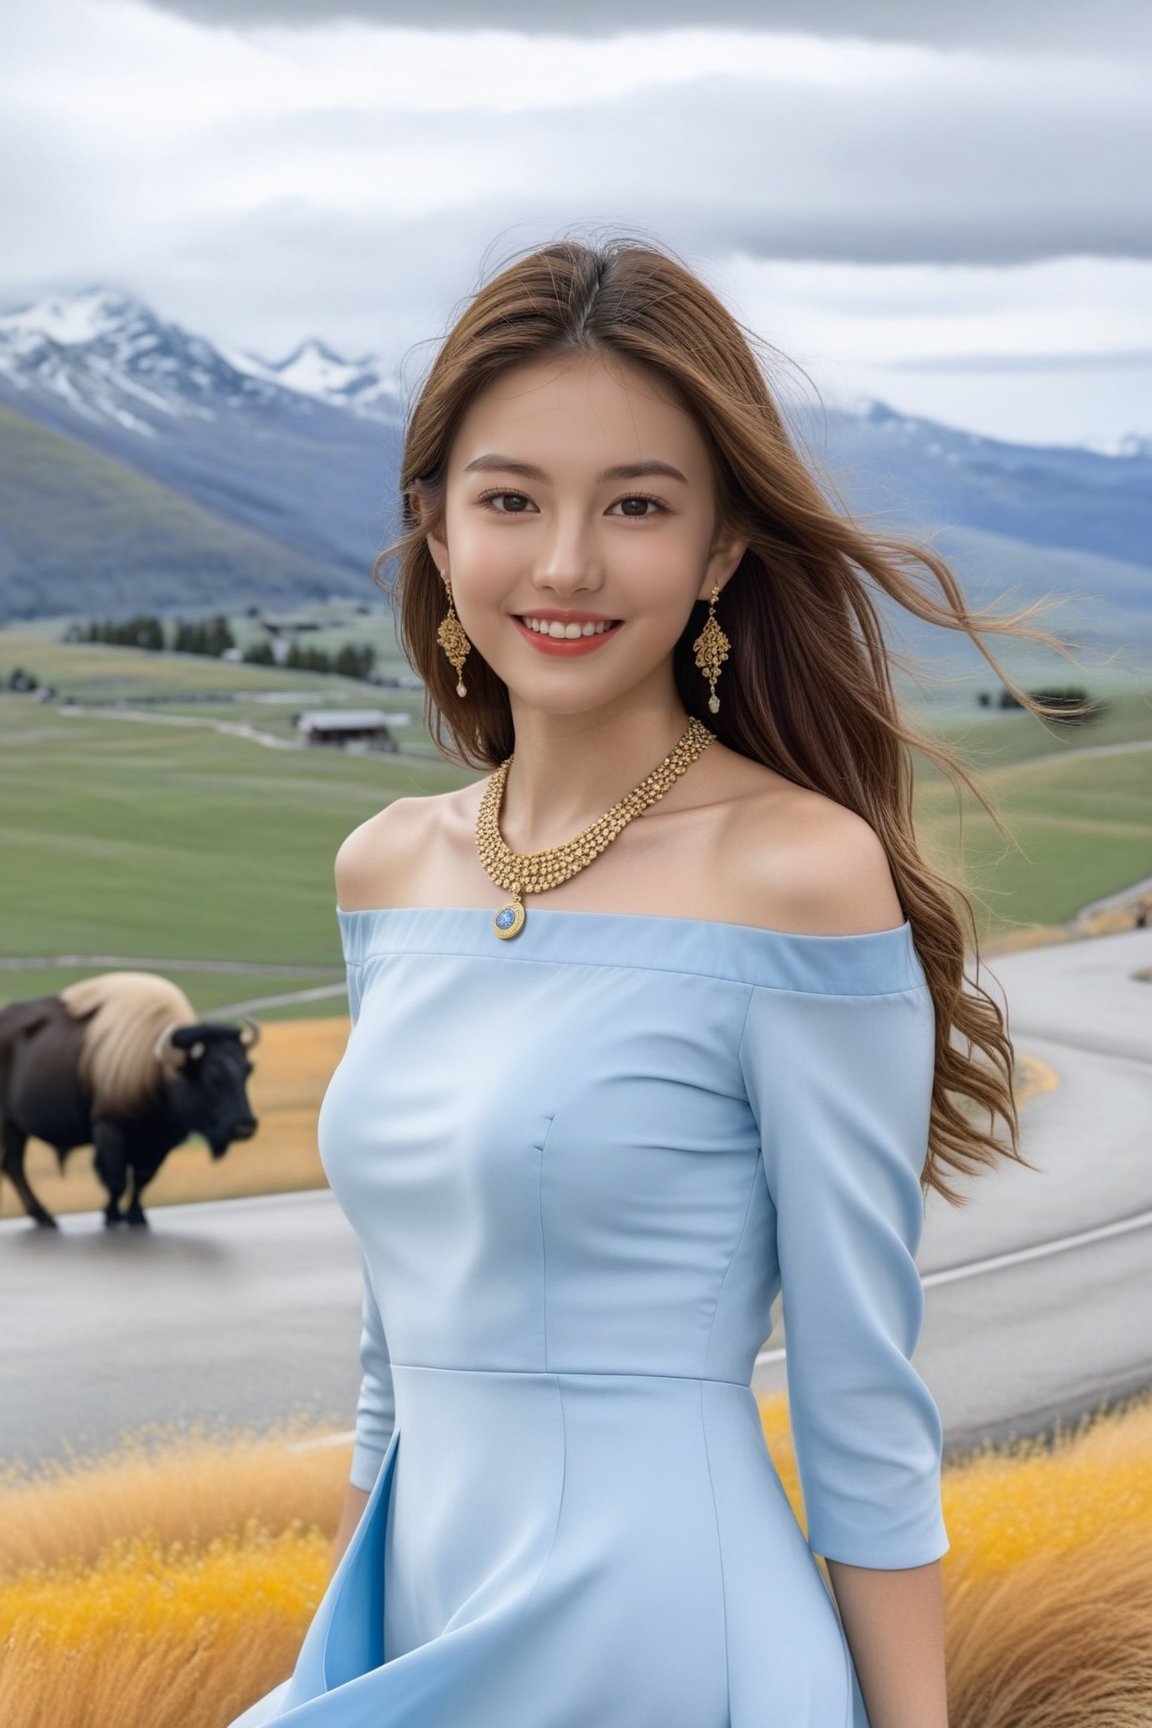 Hyper-Realistic photo of a girl,20yo,1girl,perfect female form,perfect body proportion,perfect anatomy,[baby blue and yellow color],elegant dress,detailed exquisite face,soft shiny skin,smile,mesmerizing,long hair blowing,small earrings,necklaces,Chanel bag,cluttered maximalism
BREAK
[backdrop of lamarva11ey,outdoors,sky,day, cloud,tree,cloudy sky,grass,nature,beautiful scenery,mountain,winding road,landscape,american bisons],(girl focus:1.2)
BREAK
(rule of thirds:1.3),perfect composition,studio photo,trending on artstation,(Masterpiece,Best quality,32k,UHD:1.4),(sharp focus,high contrast,HDR,hyper-detailed,intricate details,ultra-realistic,award-winning photo,ultra-clear,kodachrome 800:1.25),(infinite depth of perspective:2),(chiaroscuro lighting,soft rim lighting:1.15),by Karol Bak,Antonio Lopez,Gustav Klimt and Hayao Miyazaki,photo_b00ster,real_booster,art_booster,Ye11owst0ne,koh_yunjung